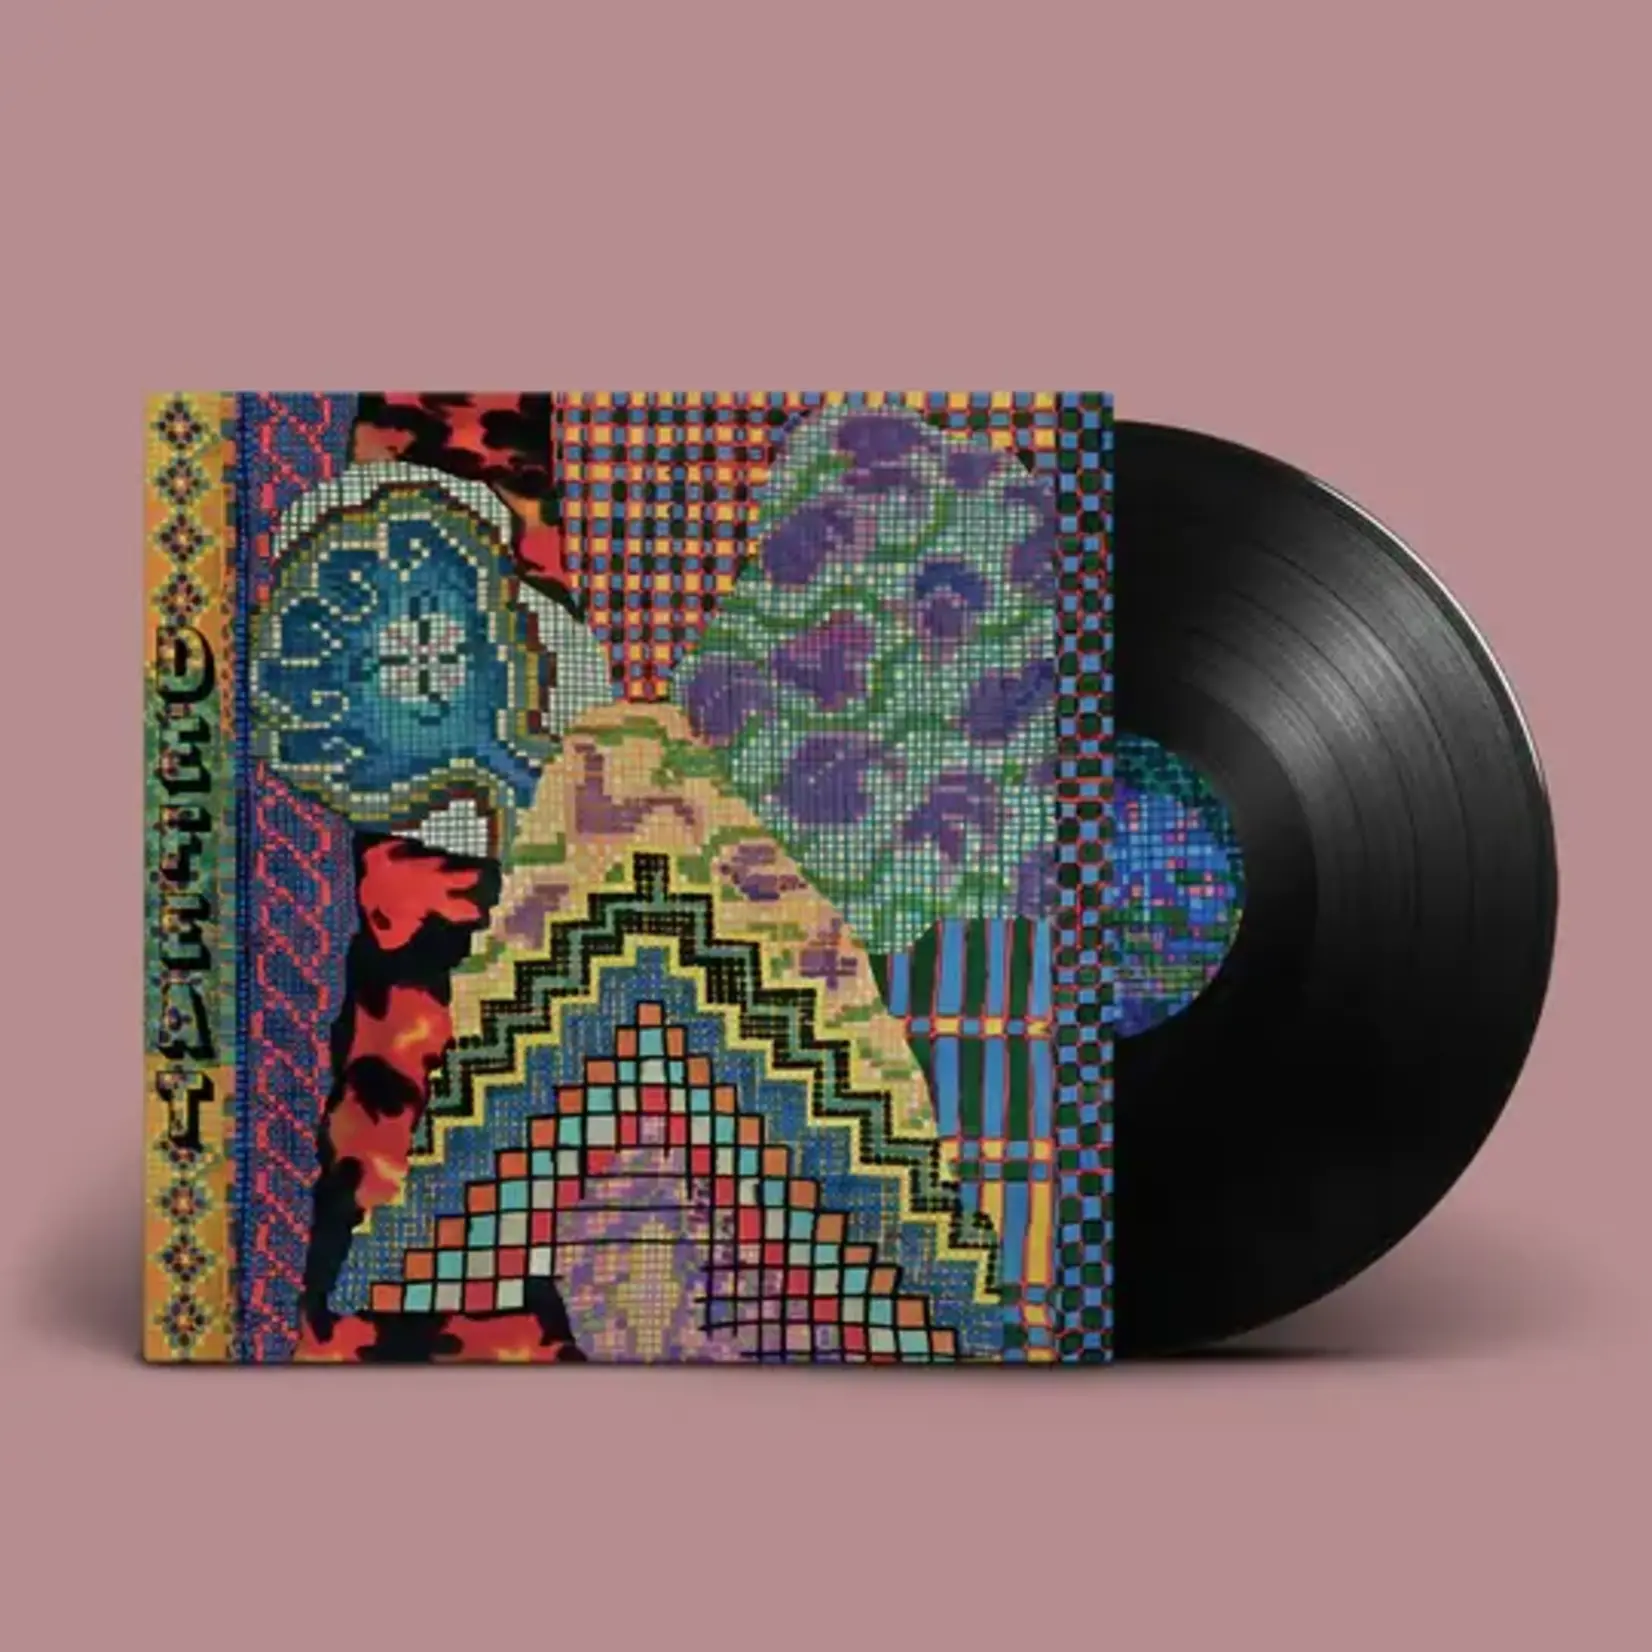 Domino Animal Collective - Defeat (LP) [Limited Edition]